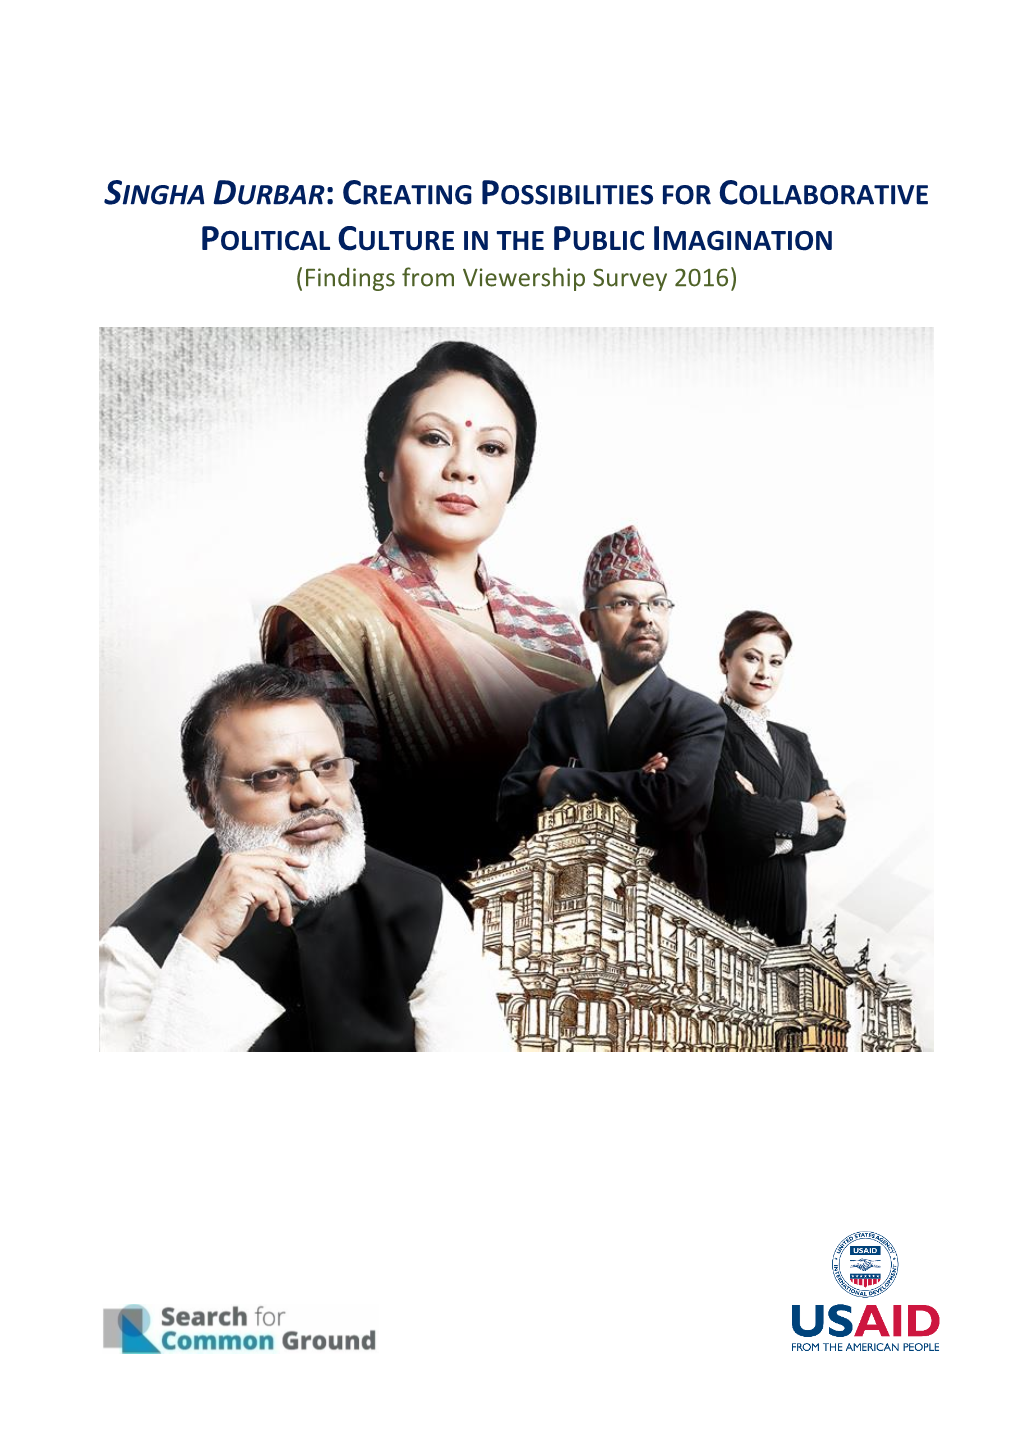 SINGHA DURBAR: CREATING POSSIBILITIES for COLLABORATIVE POLITICAL CULTURE in the PUBLIC IMAGINATION (Findings from Viewership Survey 2016)